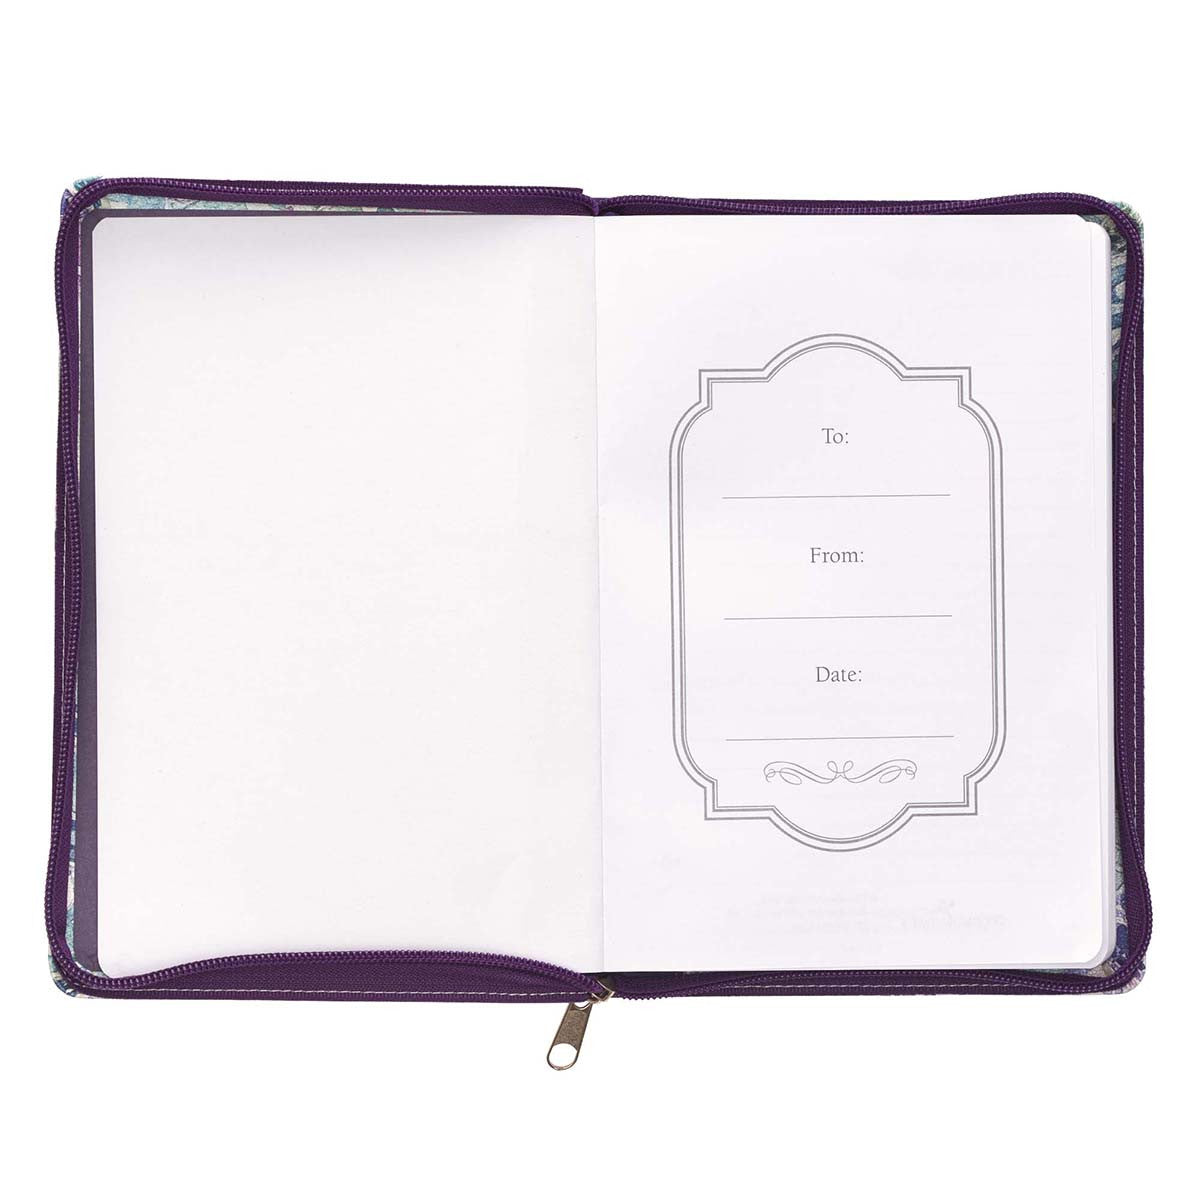 Image of Everything Beautiful Purple Quarter-bound Faux Leather Classic Journal with Zipped Closure - Ecclesiastes 3:11 other